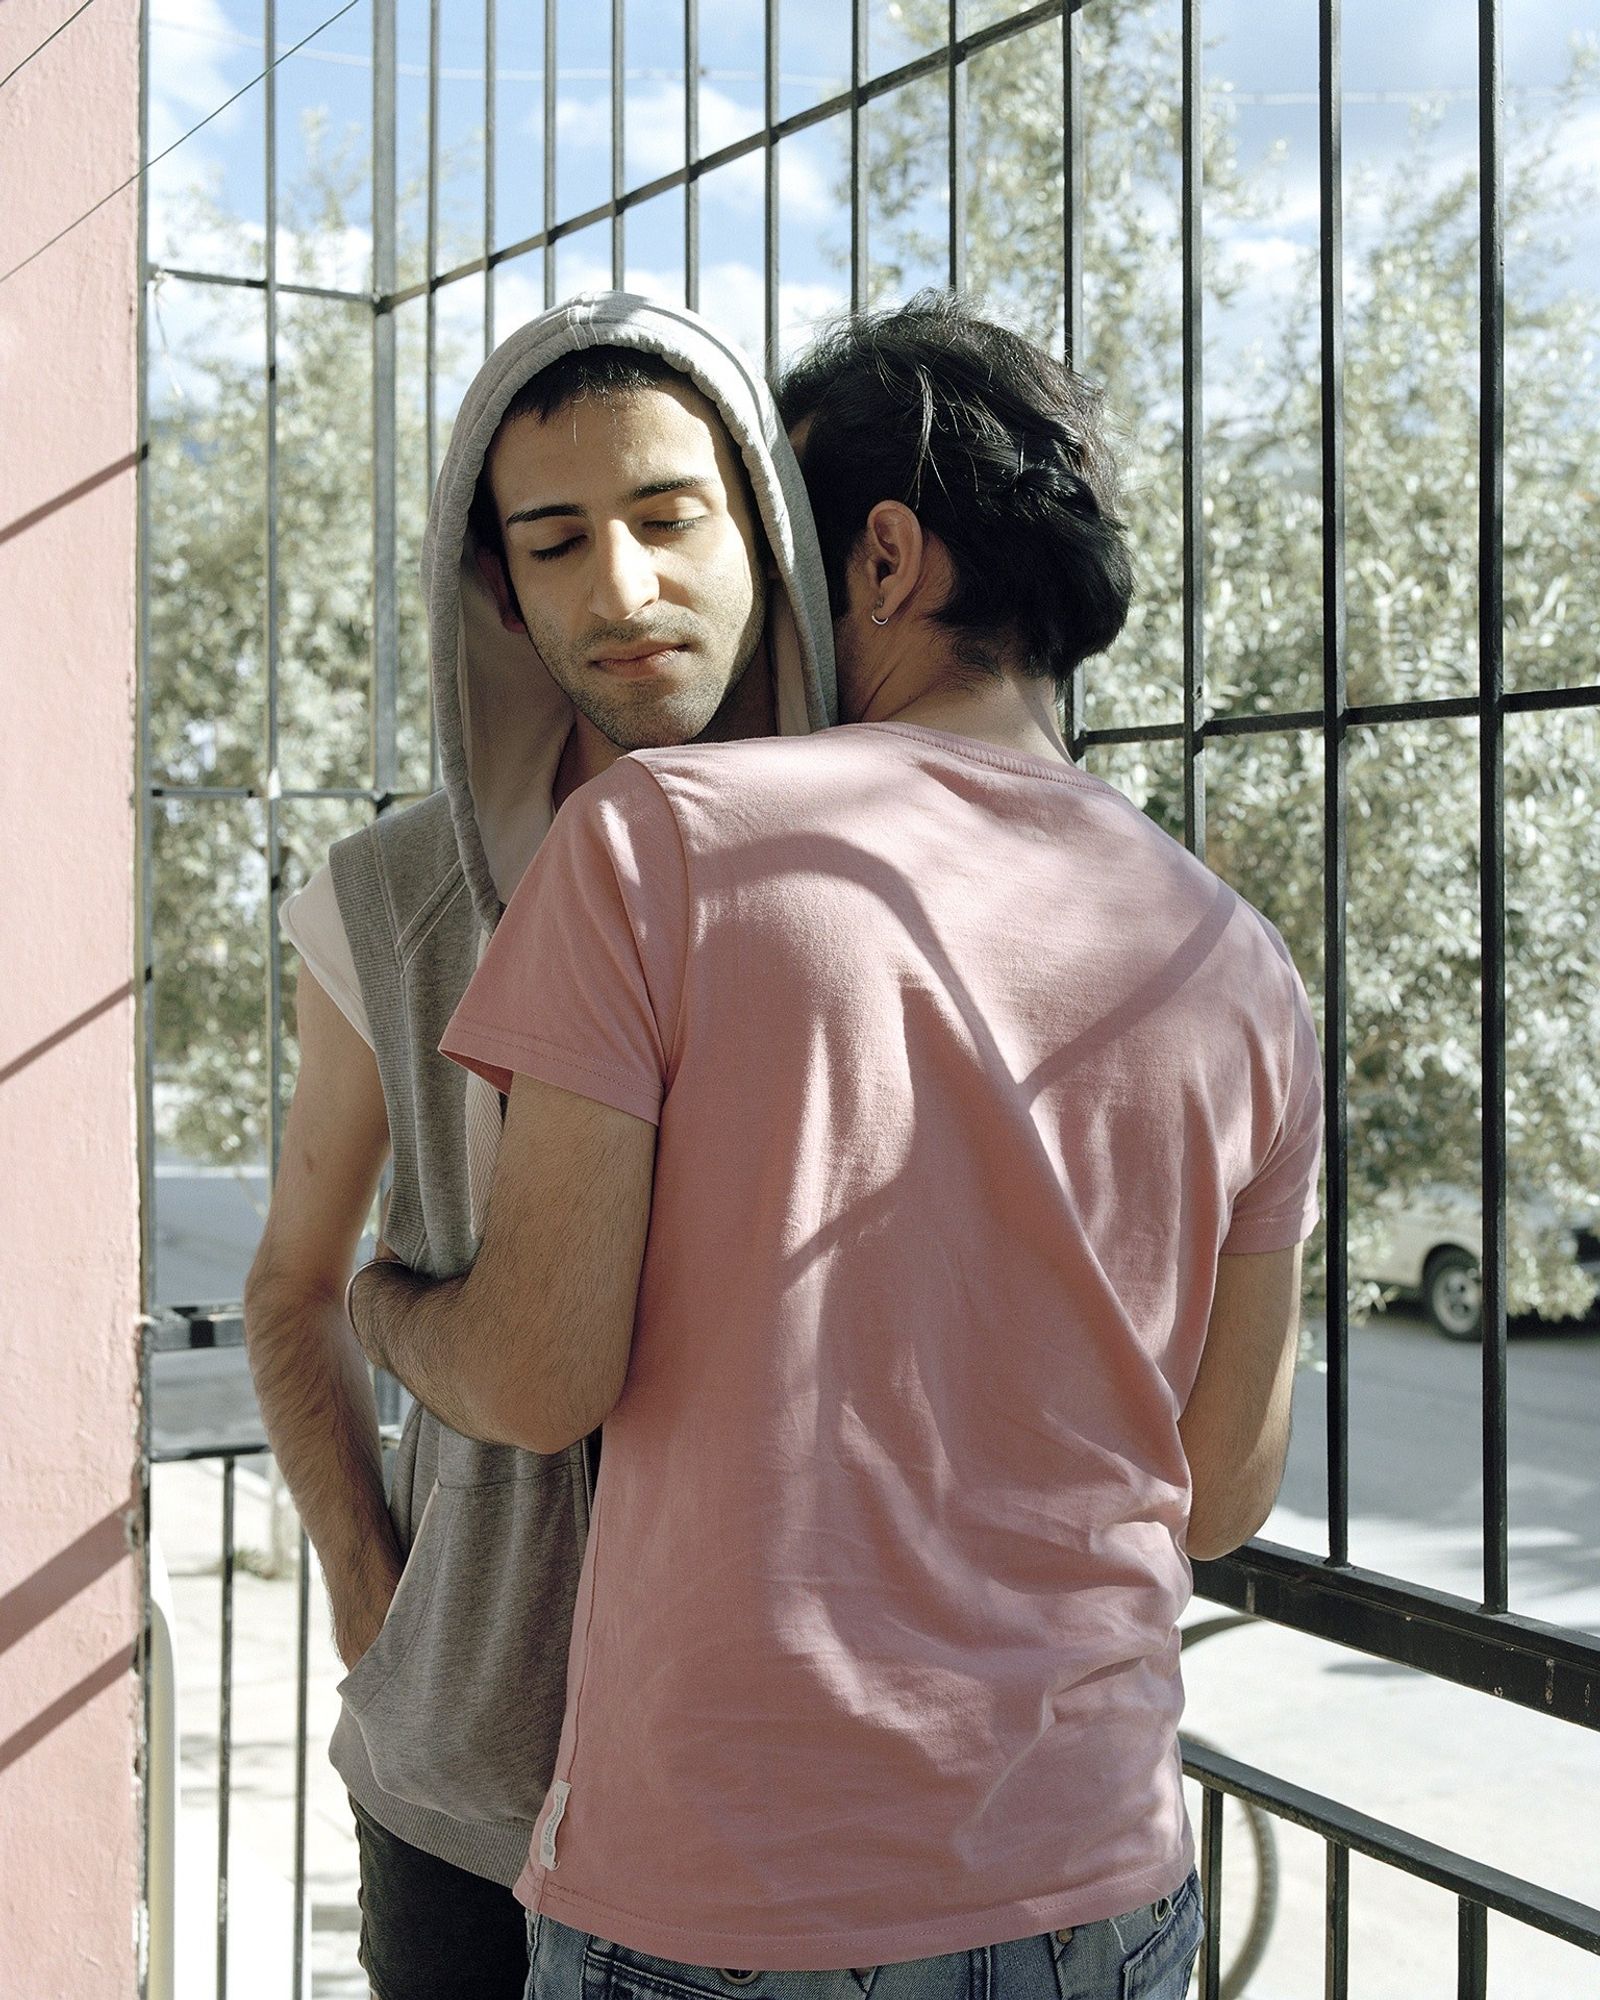 © Laurence Rasti, from the series, There are no homosexuals in Iran